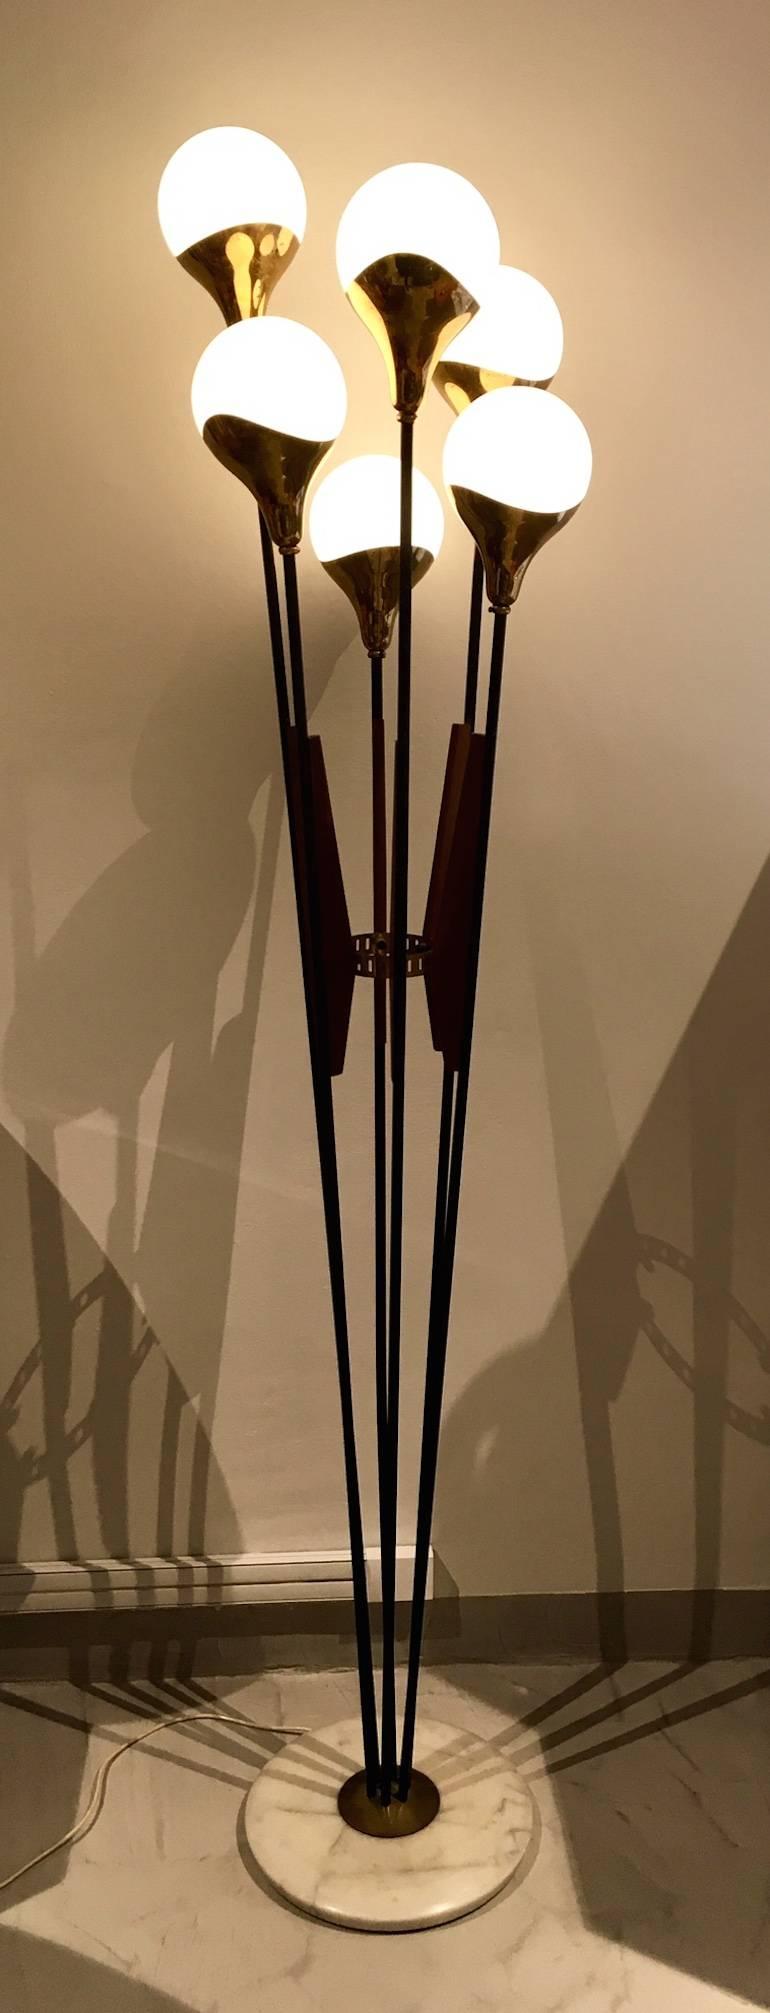 Italian Stilnovo Floor Lamp with Six Lights, Marble Base and Wooden Details